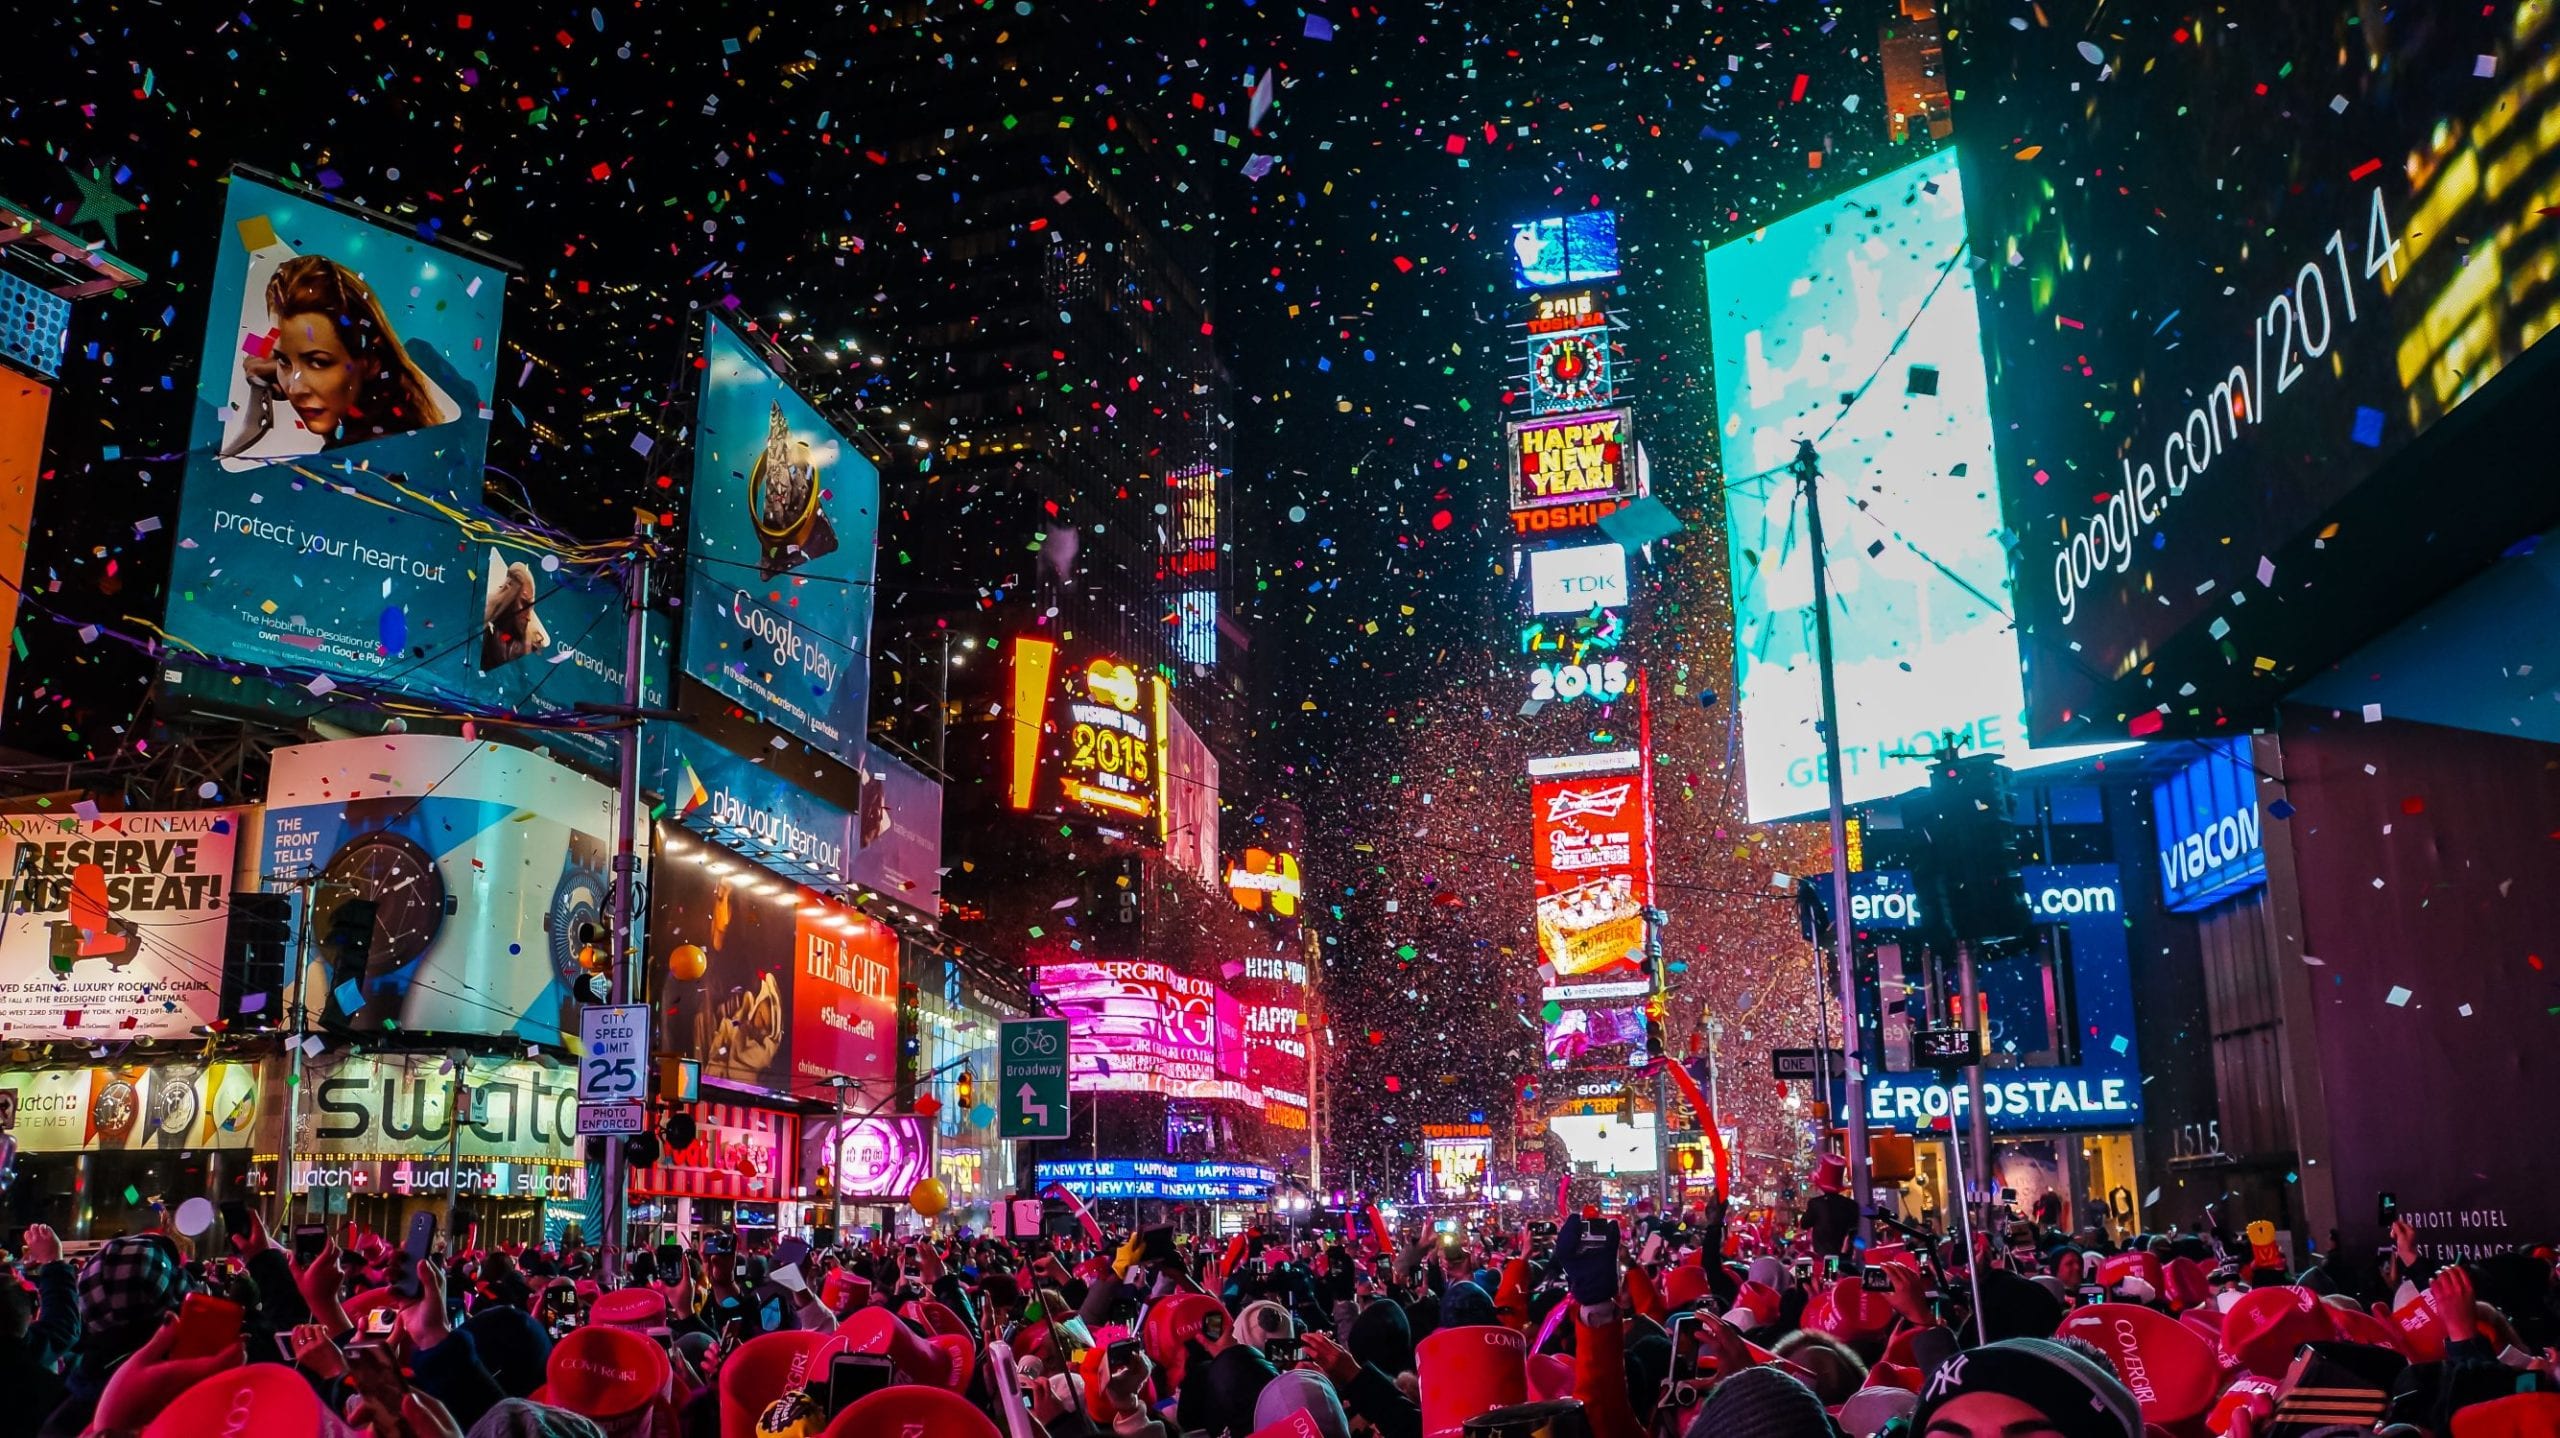 Times Square celebrates New Year with confetti and the ball dropping. Credit: Shutterstock